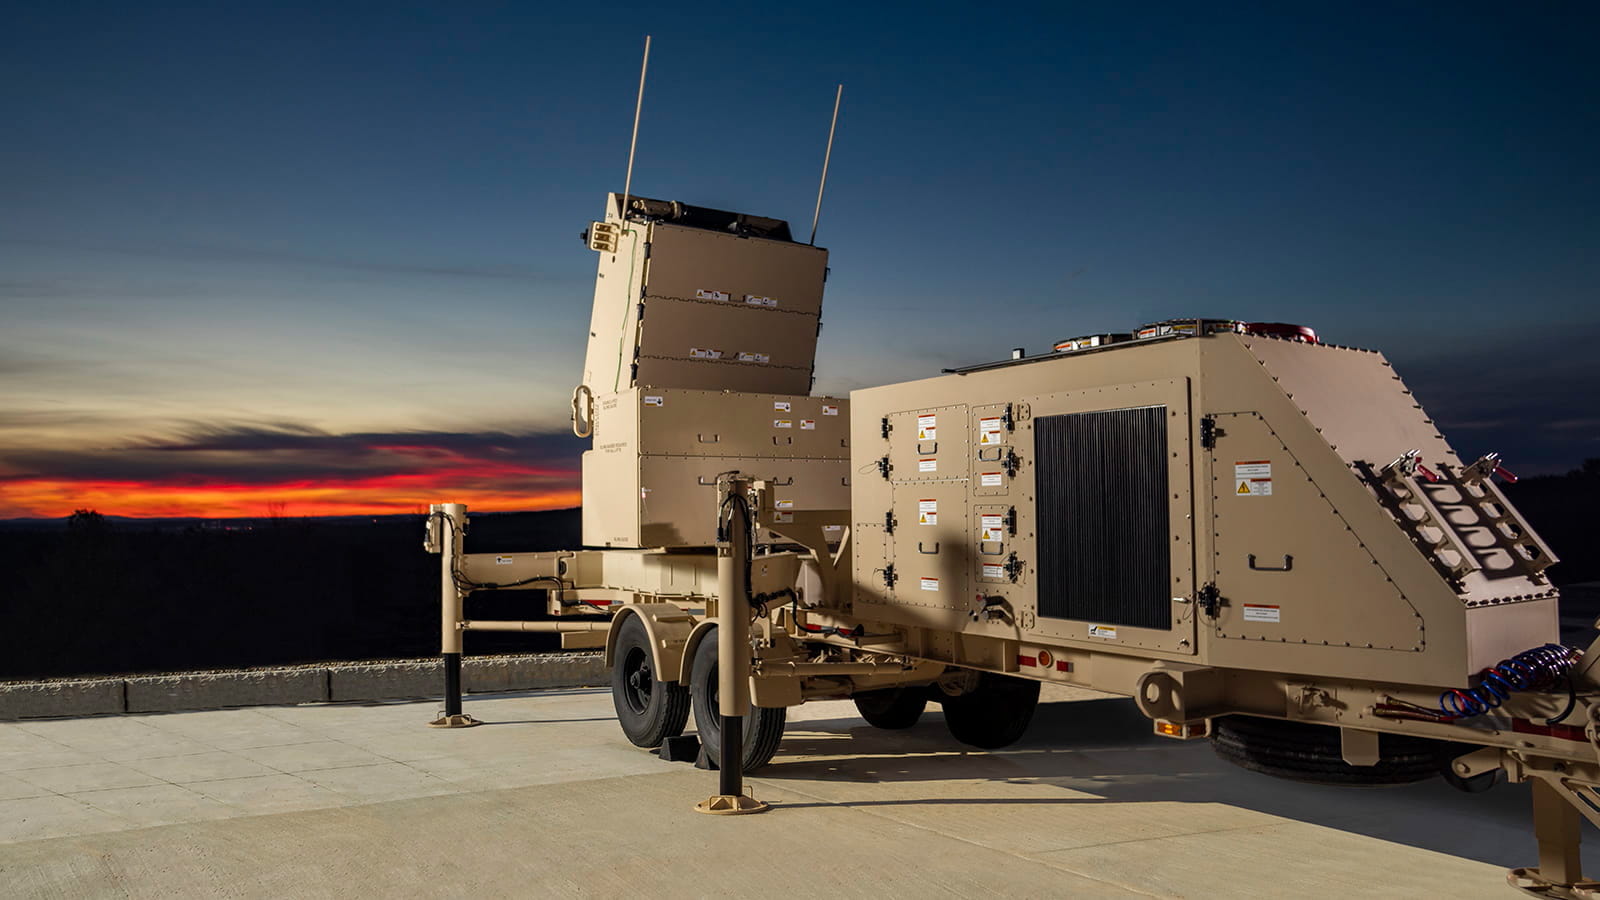 A military missile defense radar with a sunset in the background